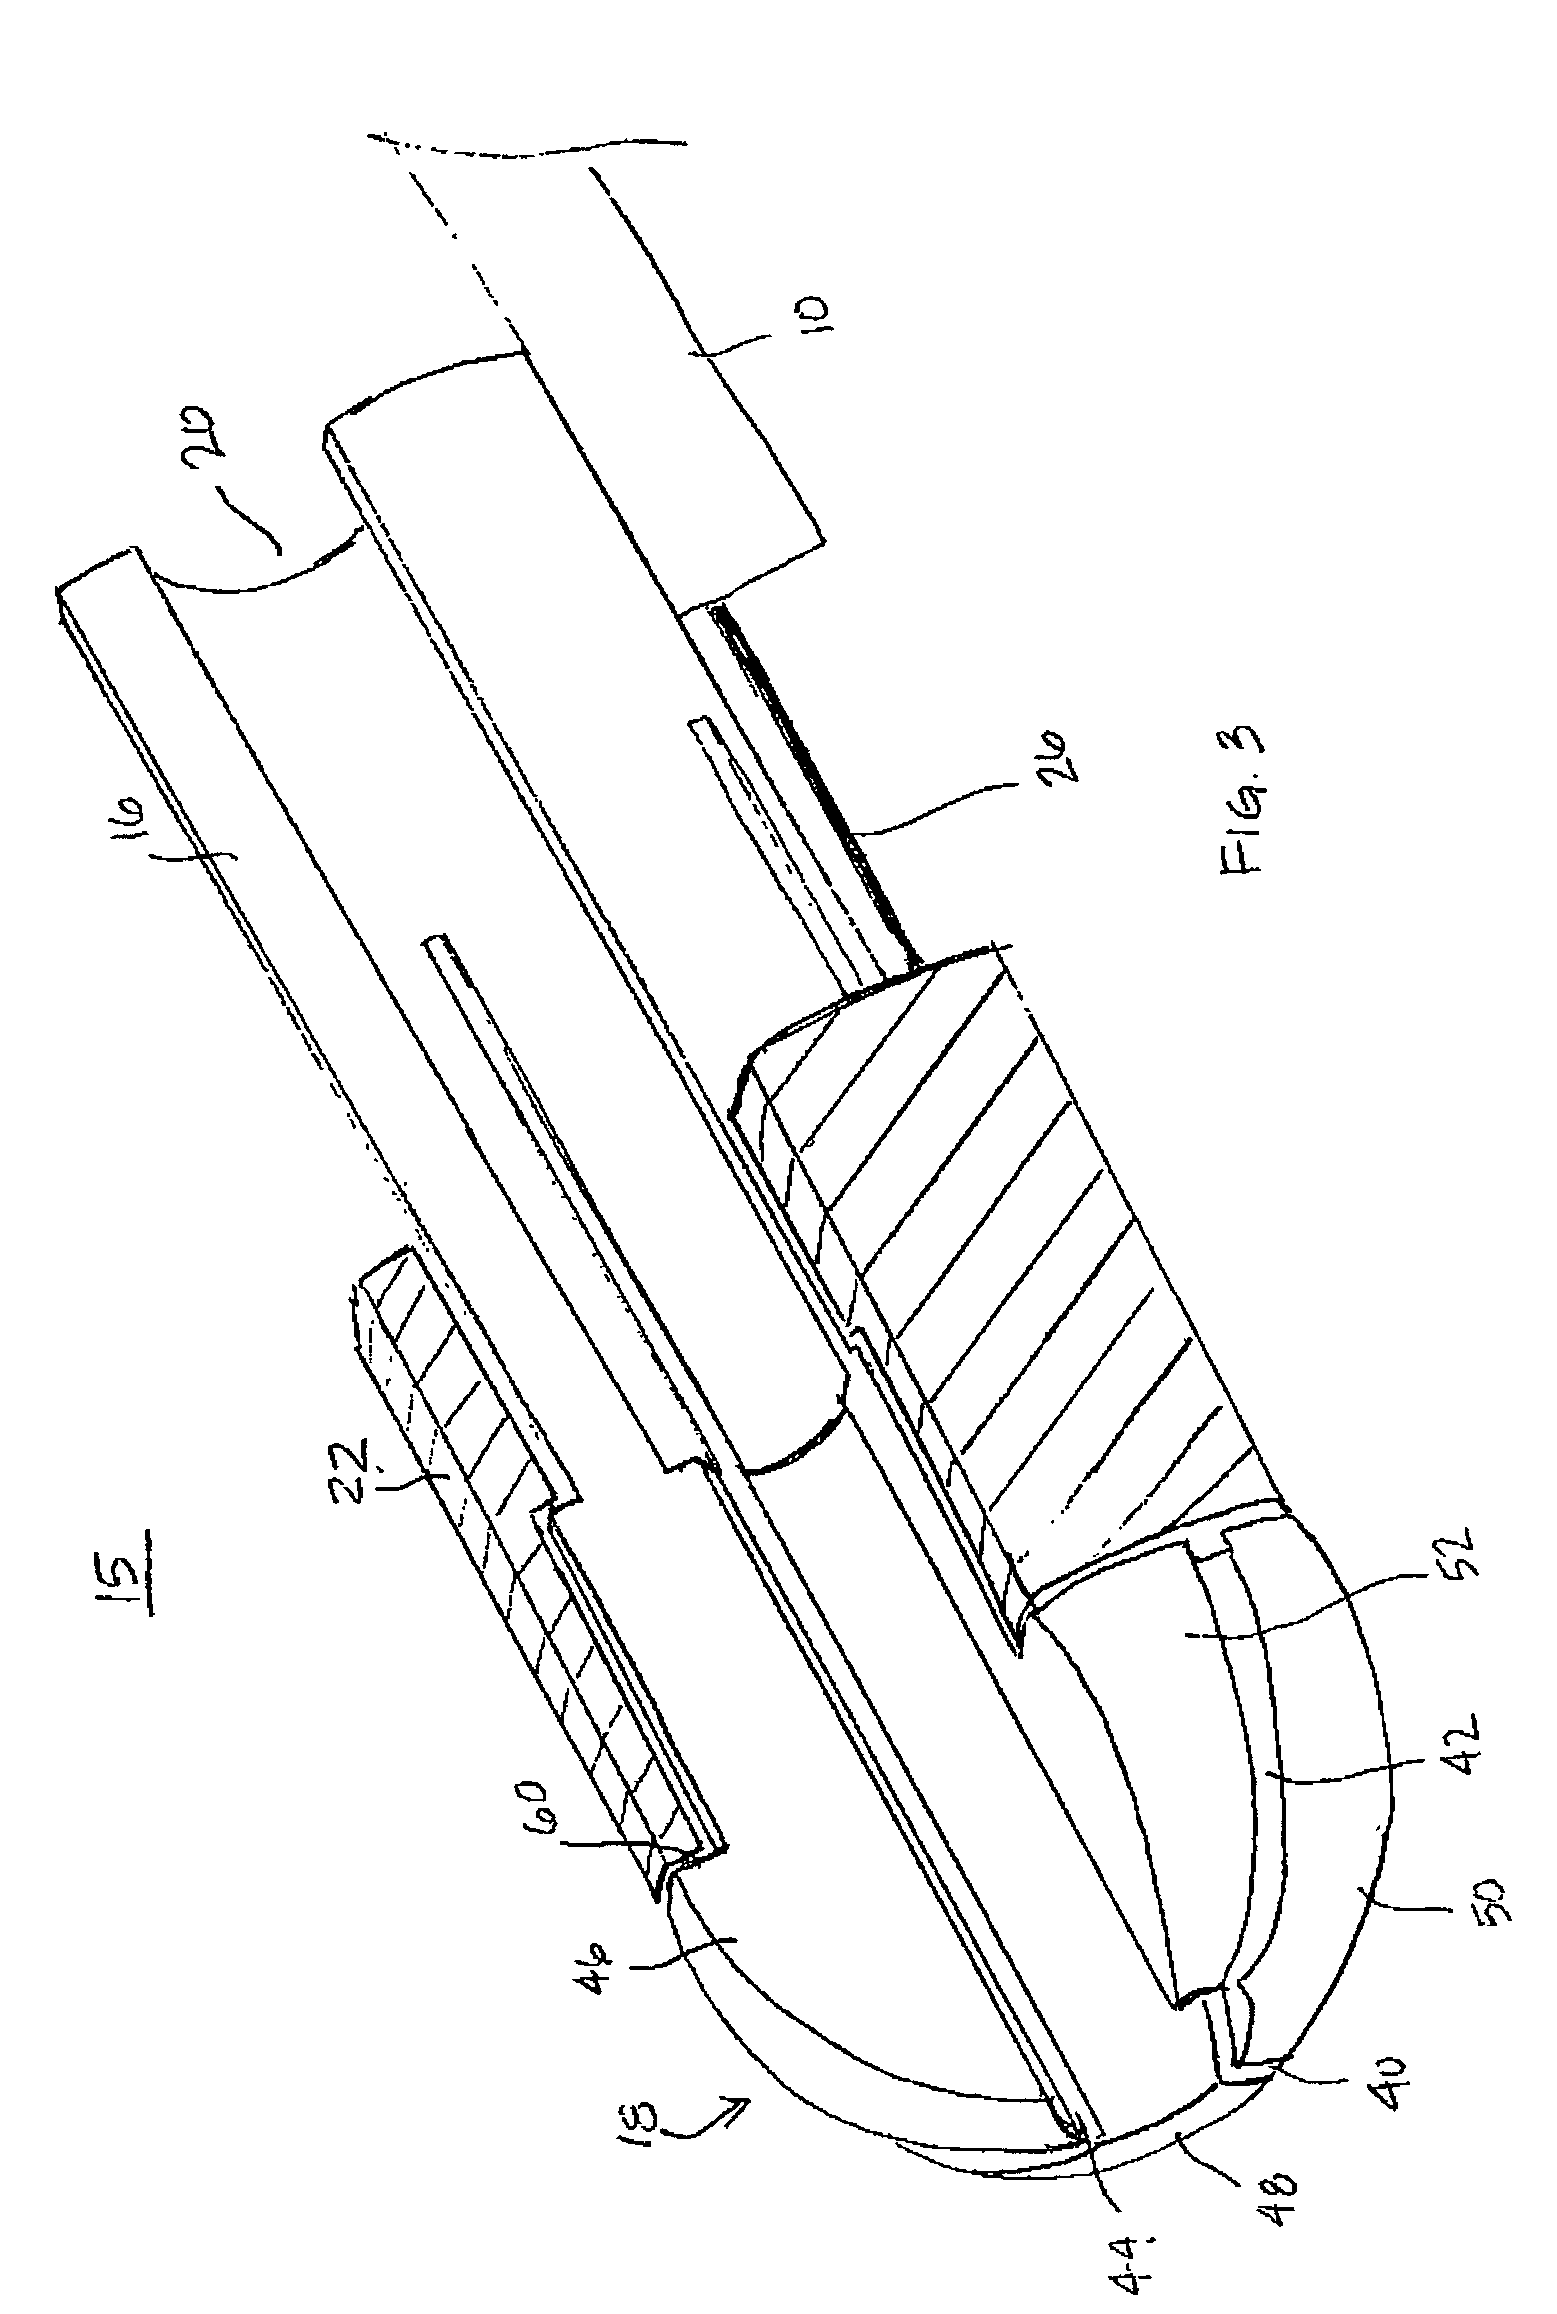 Non-sheath based medical device delivery system